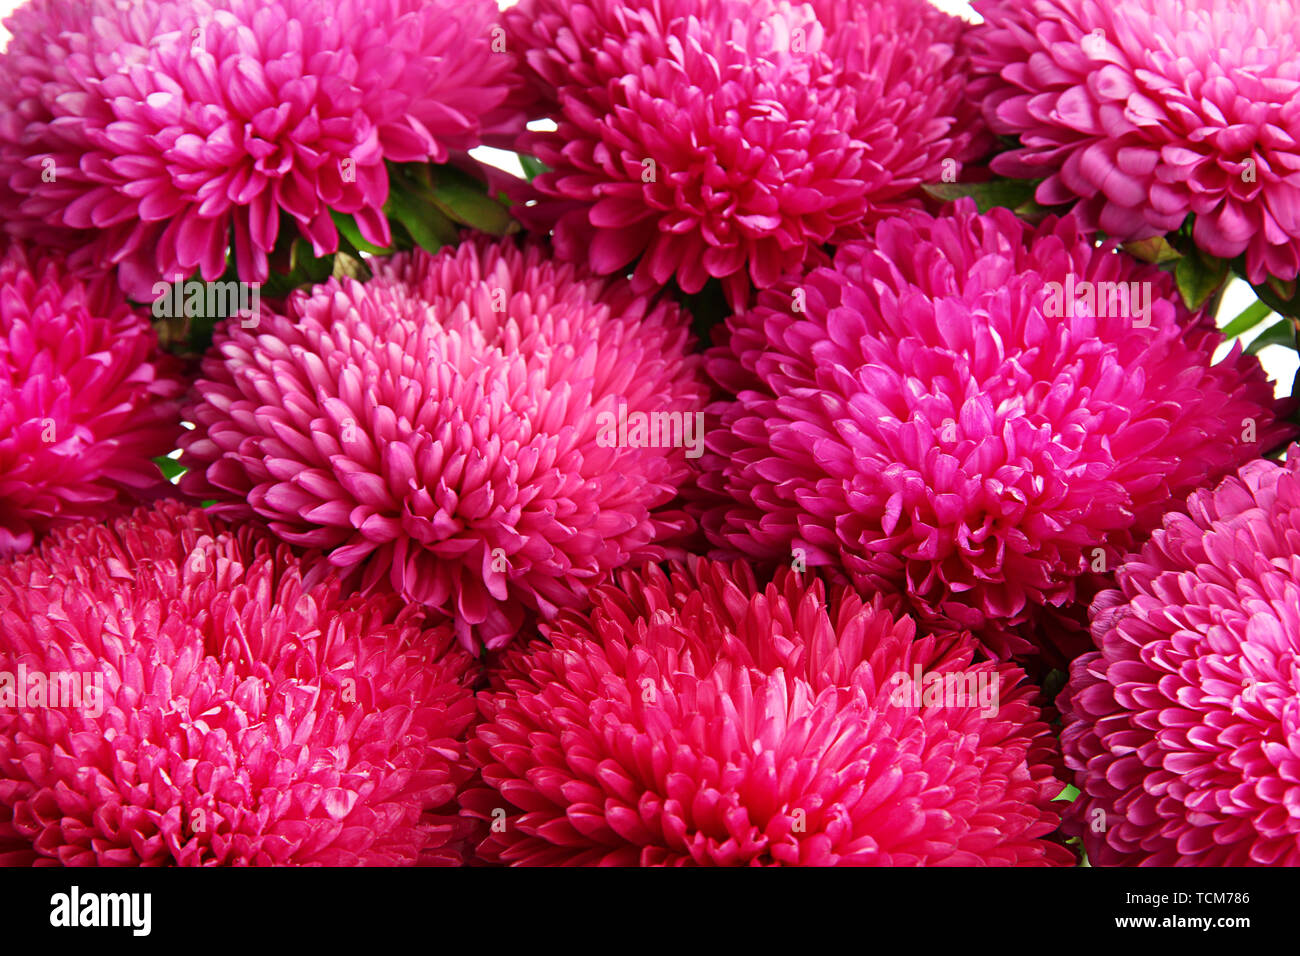 pink aster flowers, close up Stock Photo